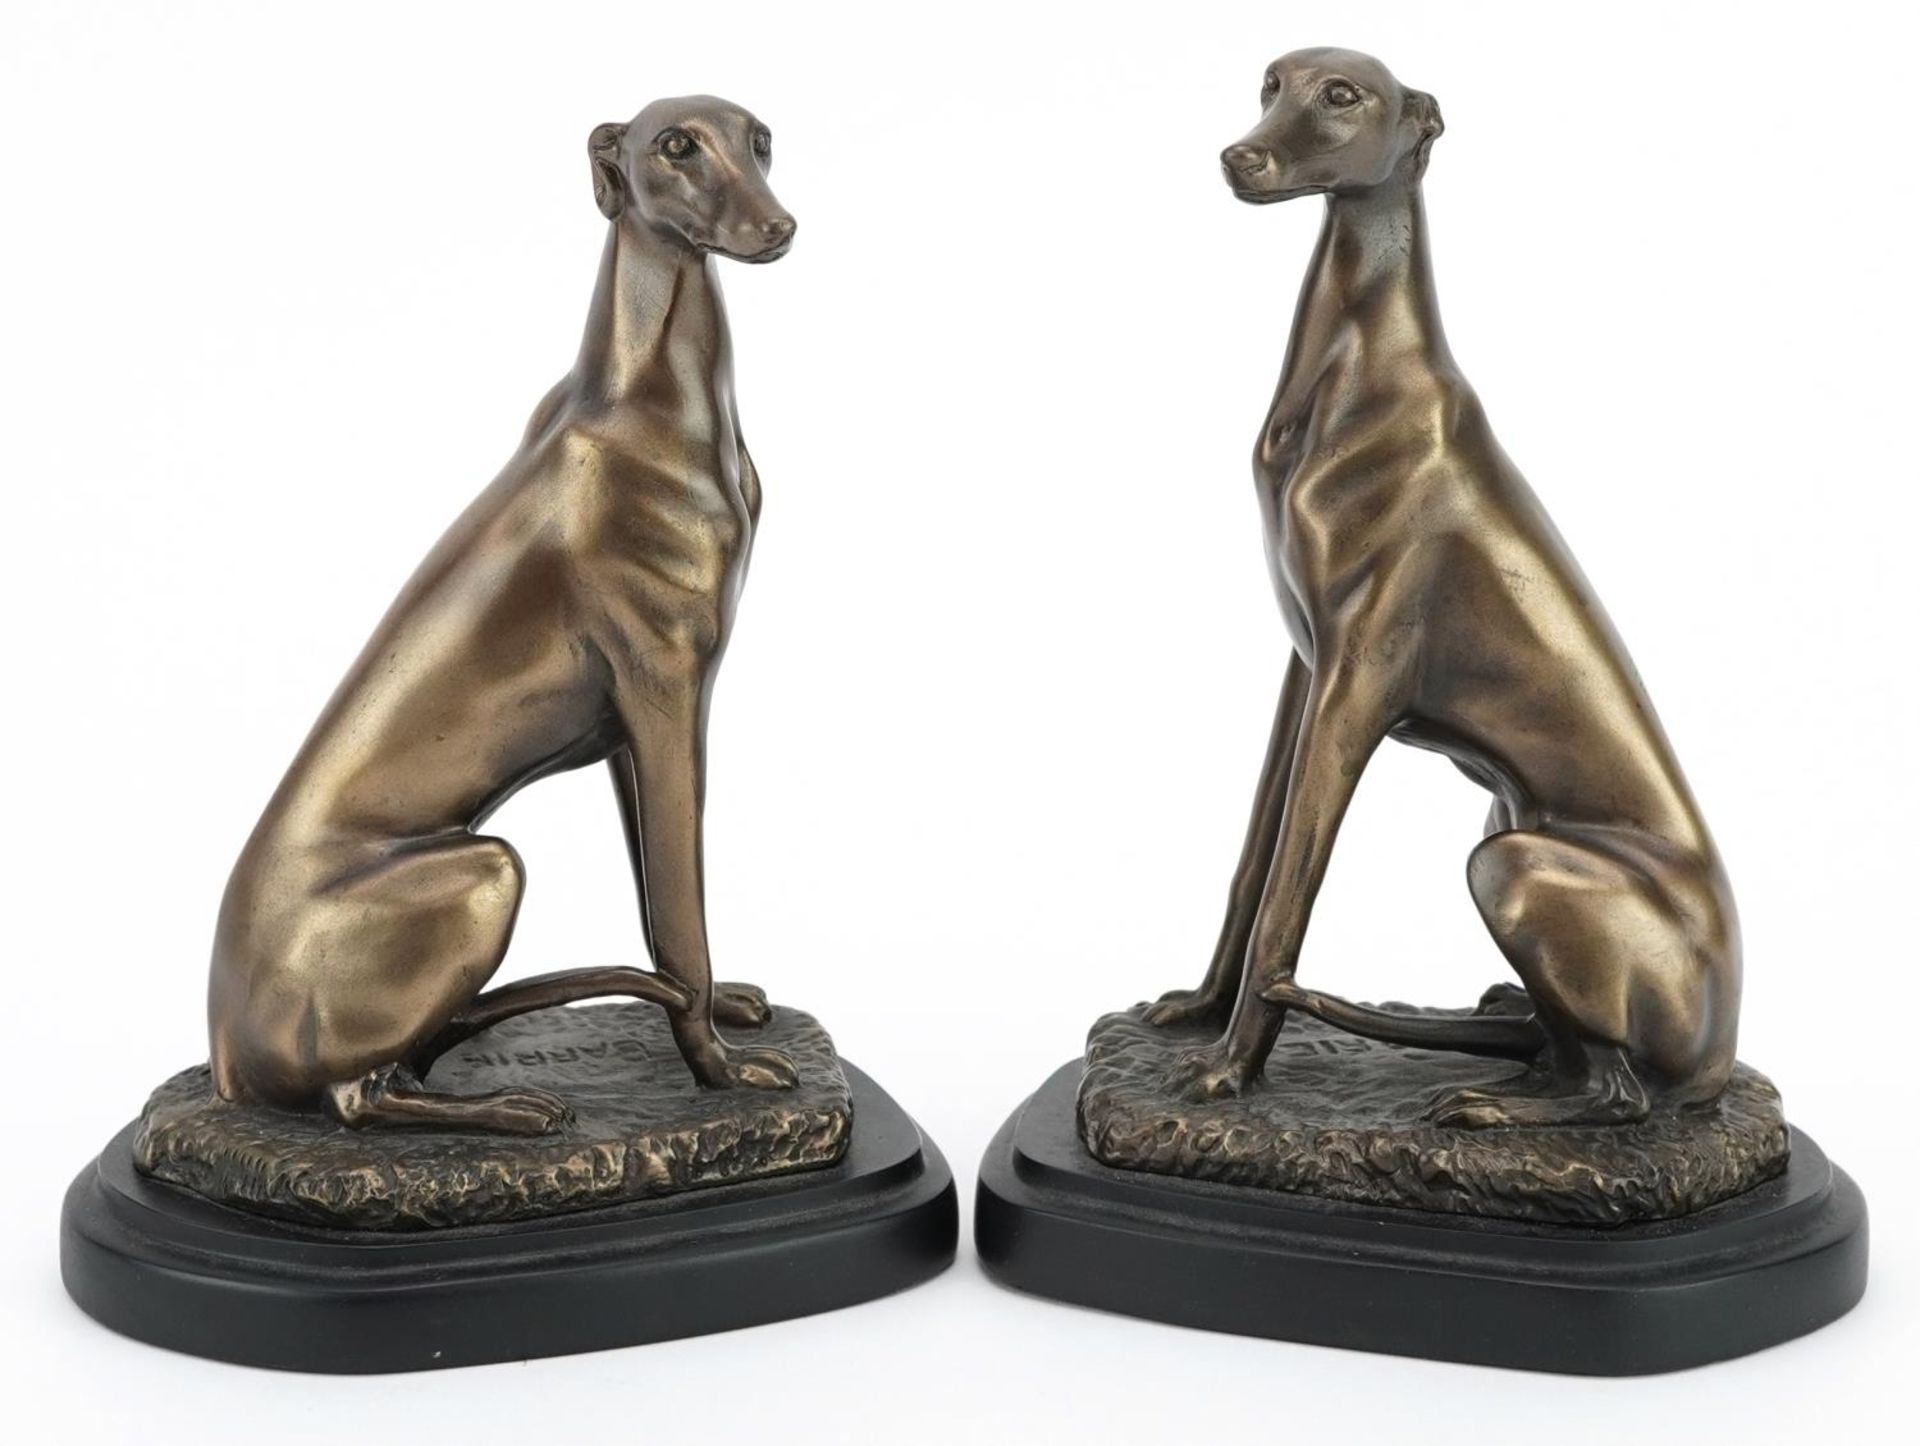 After Barrie, pair of bronzed studies of seated greyhounds, 18.5cm high : For further information on